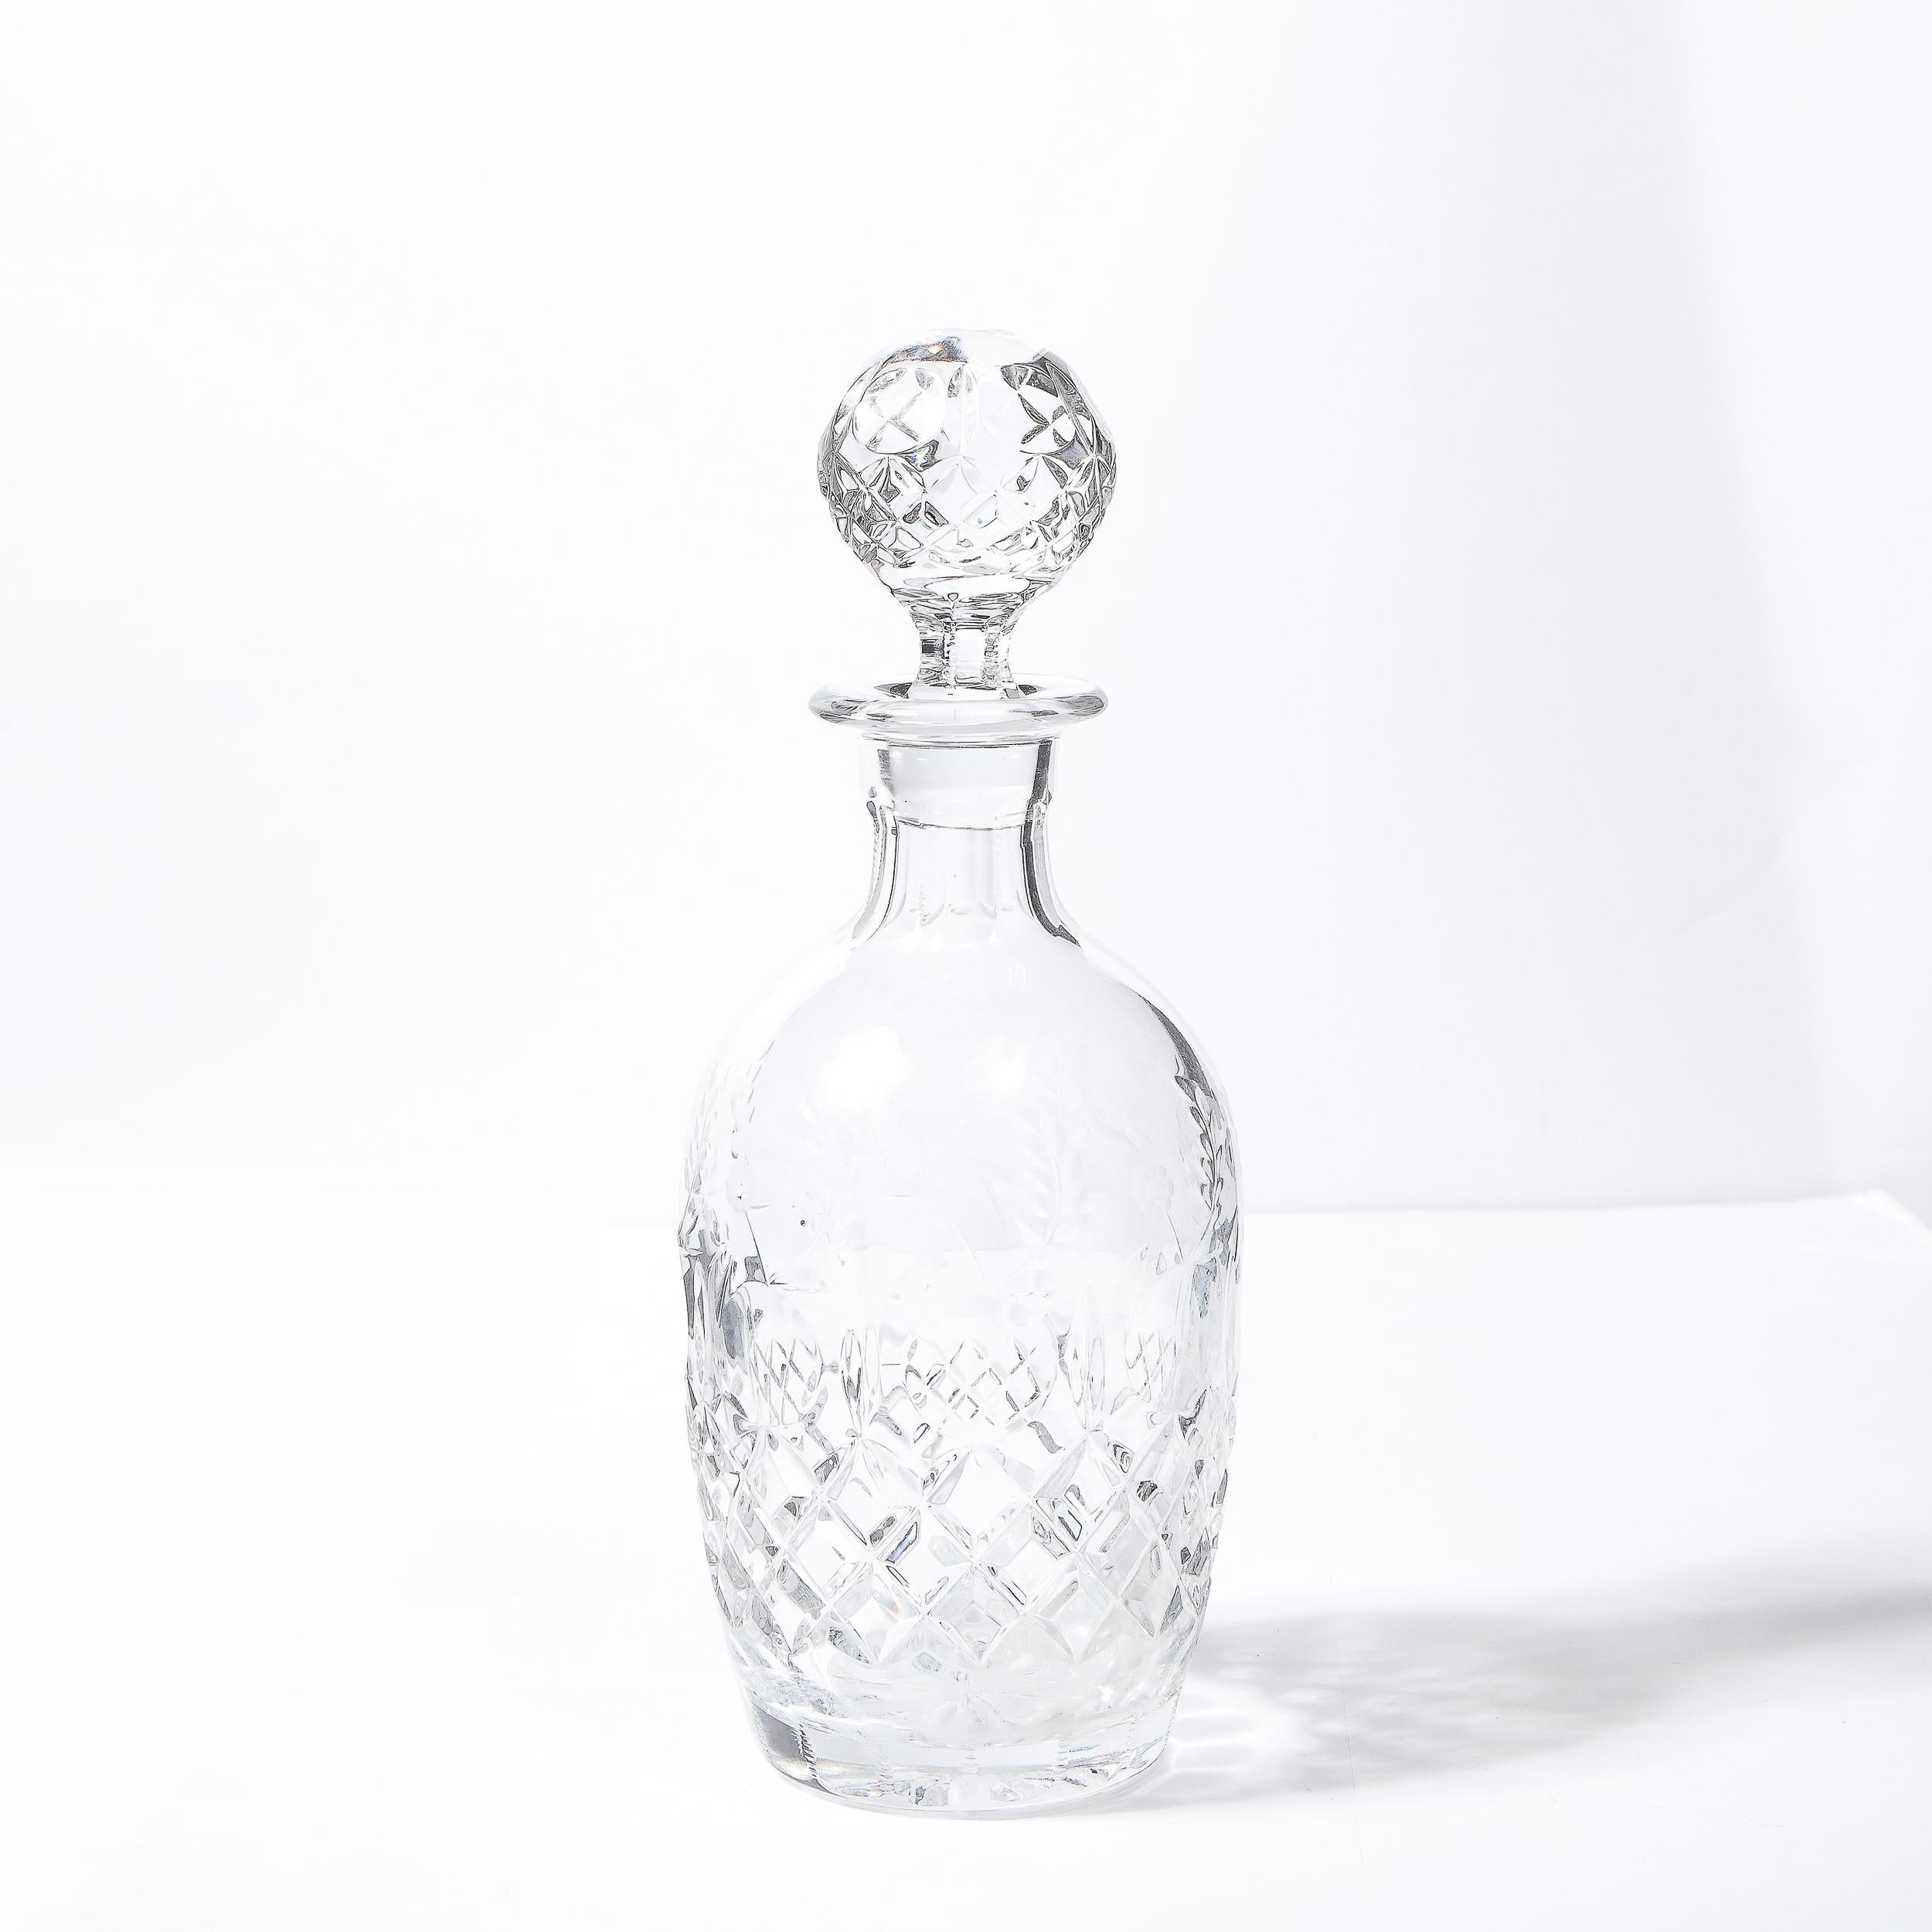 This elegant Mid-Century Modern crystal decanter was realized in the United States circa 1950. It features a cylindrical body with a finely proportioned neck that flares at its apex. A spherical etched crystal stopper with a cylindrical base neatly